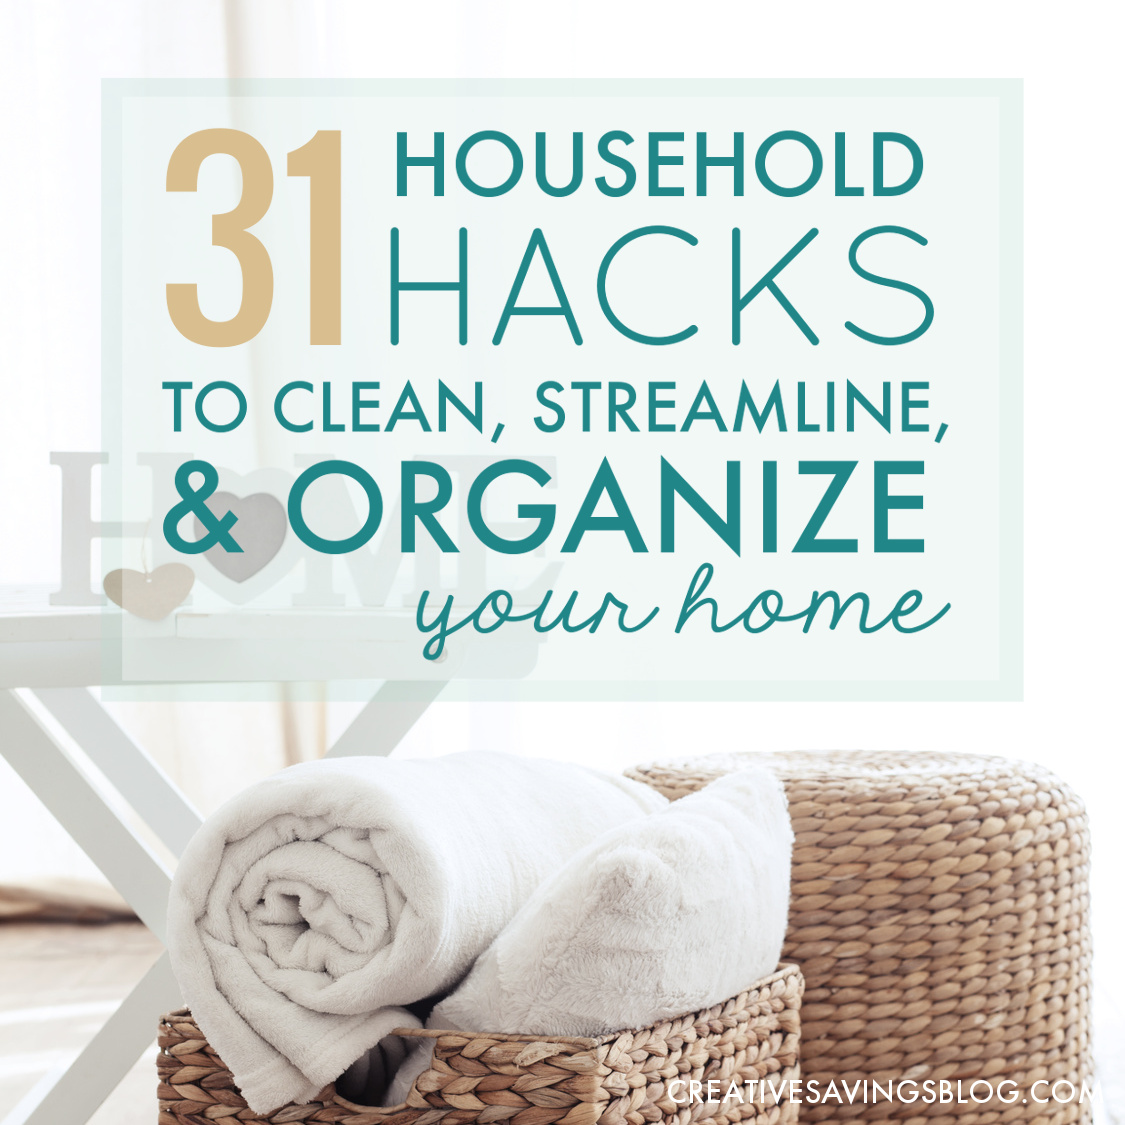 31 Household Hacks to Clean, Streamline, and Organize Your Home